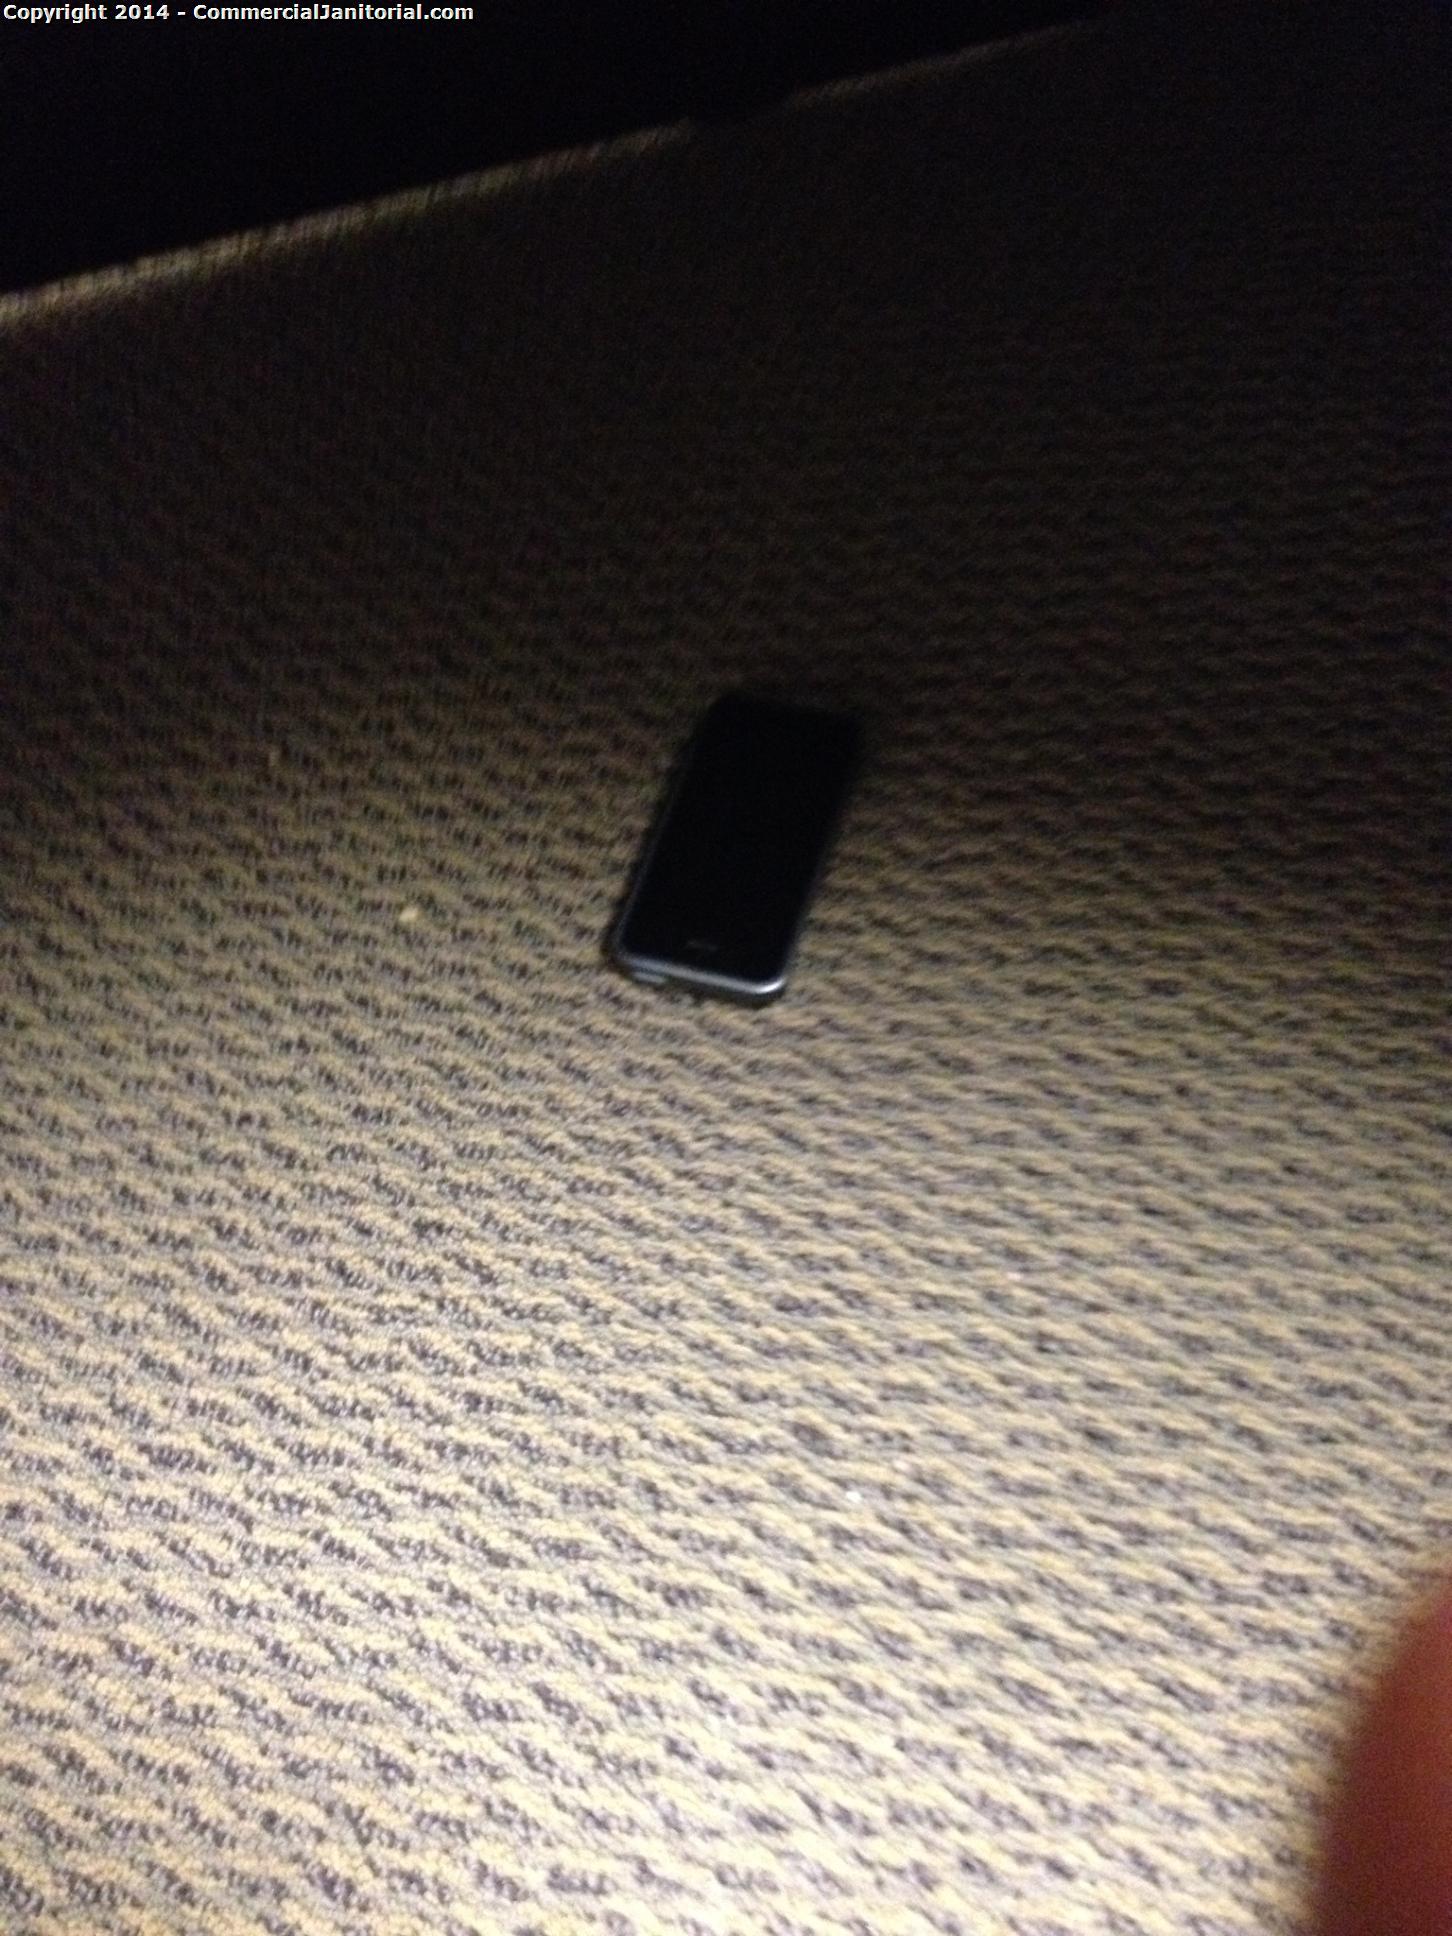 This phone was on the floor and it has been left on the desk next to were it was found. Things we find when cleaning small businesses